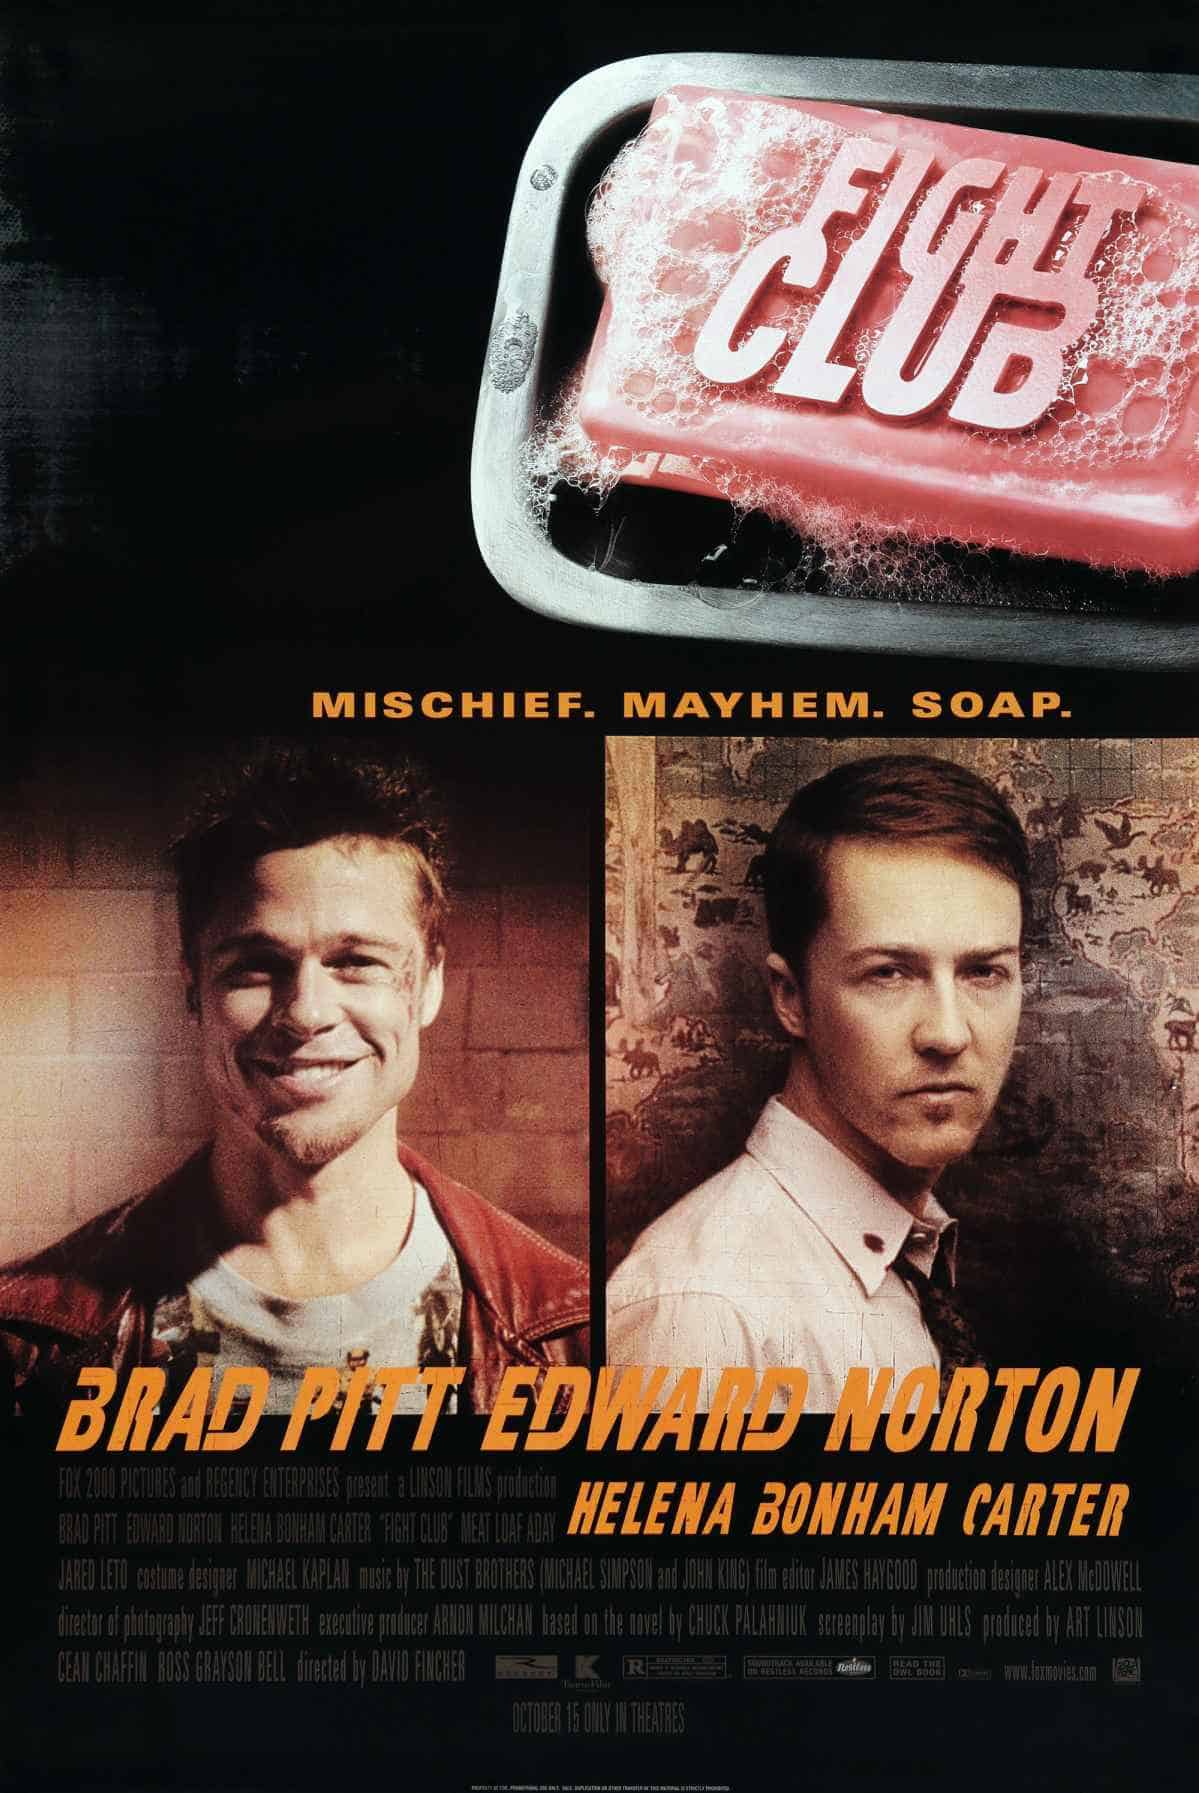 Best Fighting Movies You Can't Miss Fight Club (1999)